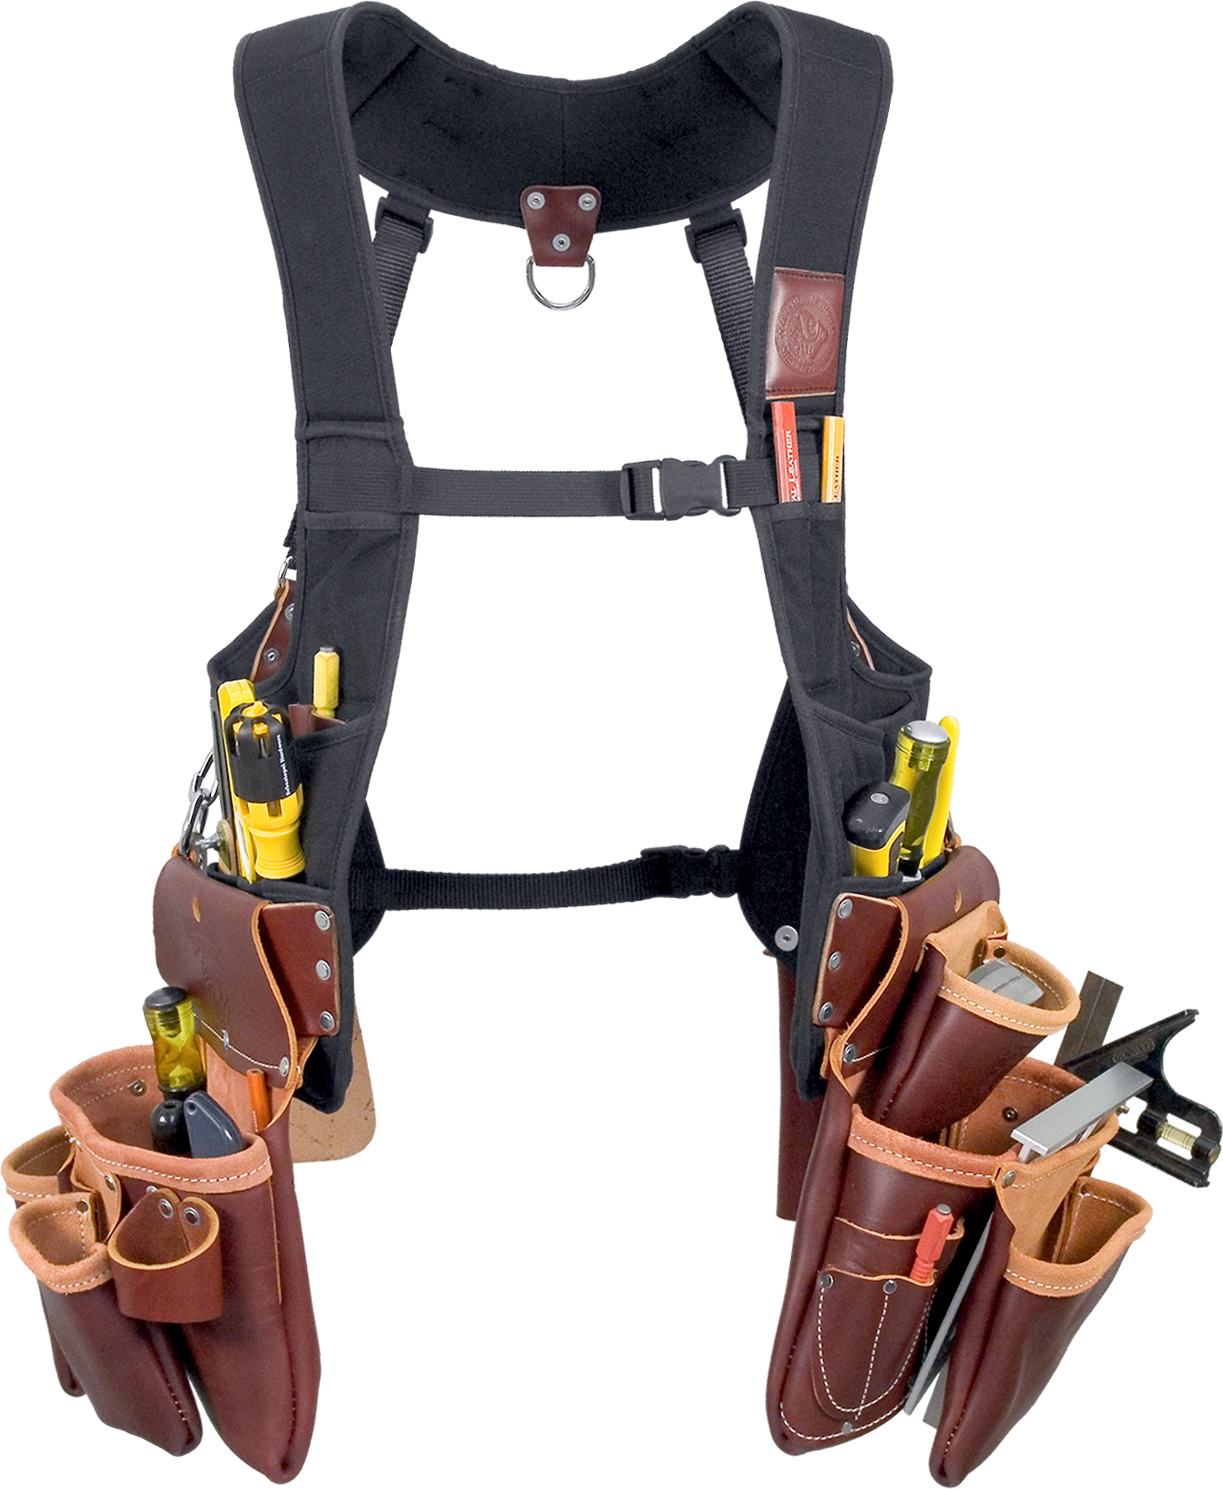 Occidental Leather OCC-2550 Suspendavest Leather Package - Atlas